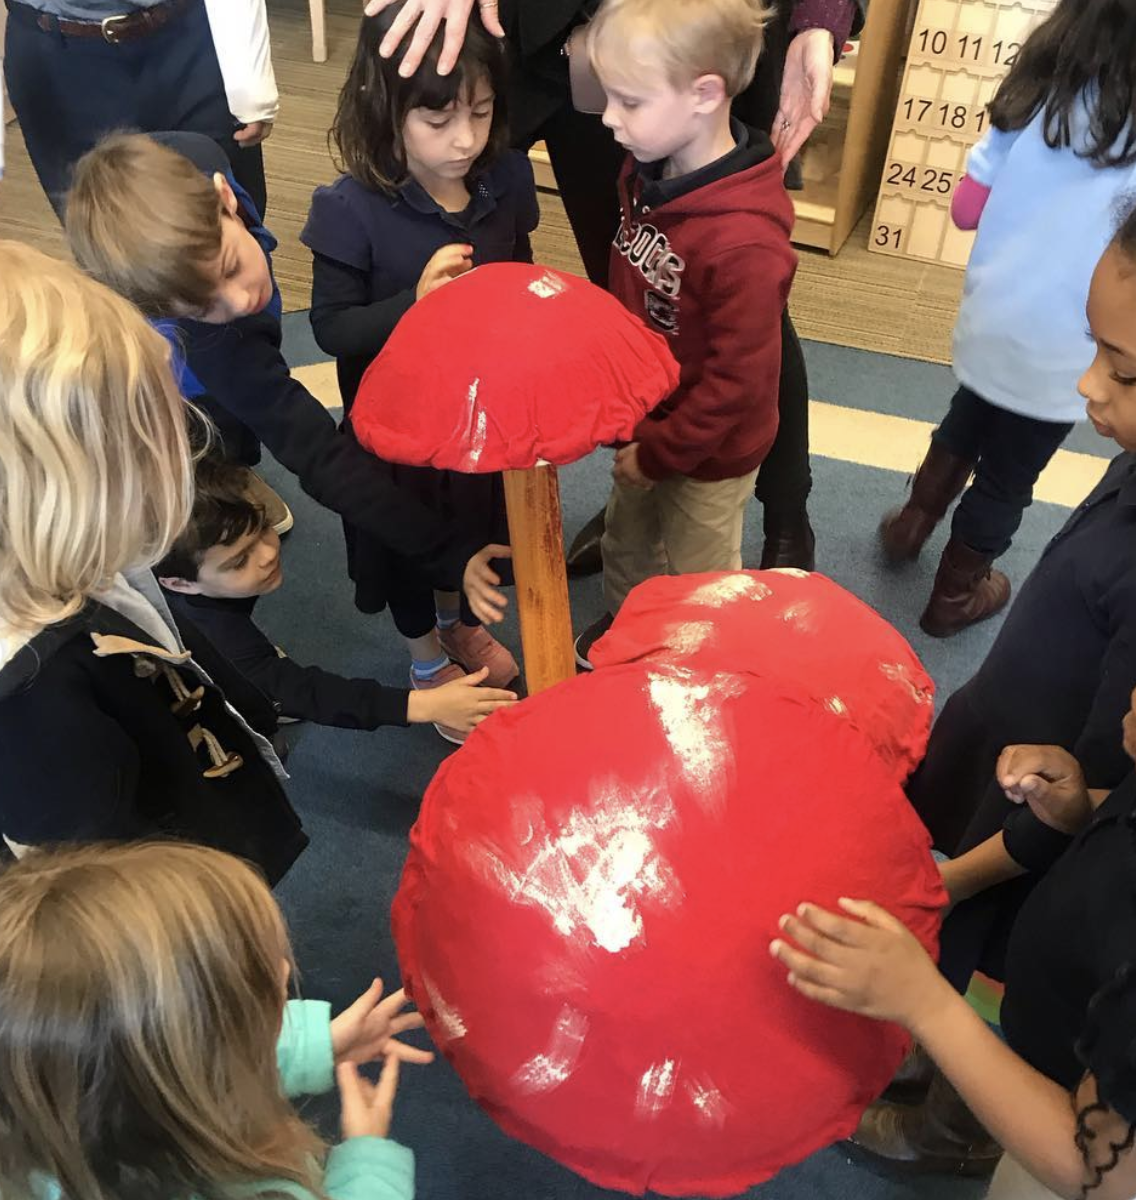  The teacher and students at James Simons Elementary School are working on a mushrooms curriculum in preparation for THE FUNGUS AMONG US, opening March 14  @reduxartcenter . The students are studying mycelium, growing mushroom logs and making 🍄 scul